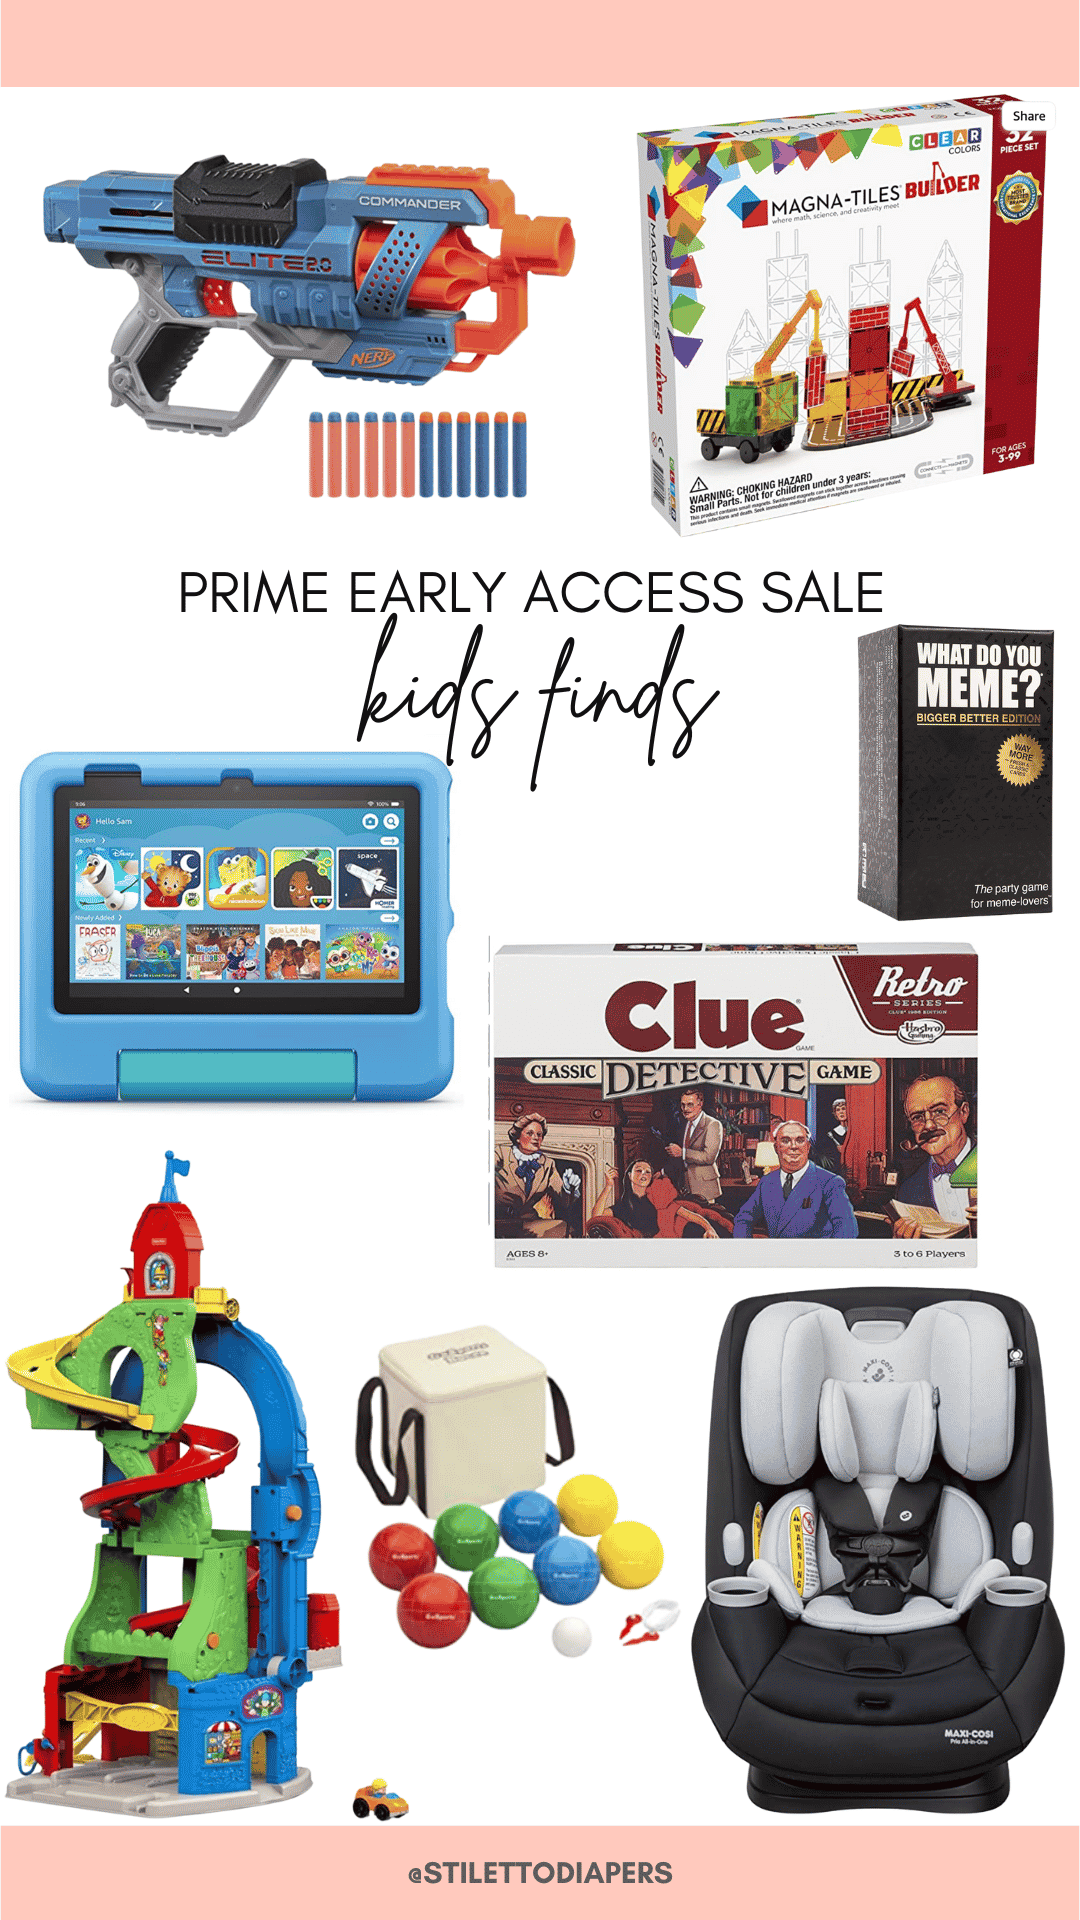 Amazon Prim Early Access Kids Finds, Stilettos and Diapers